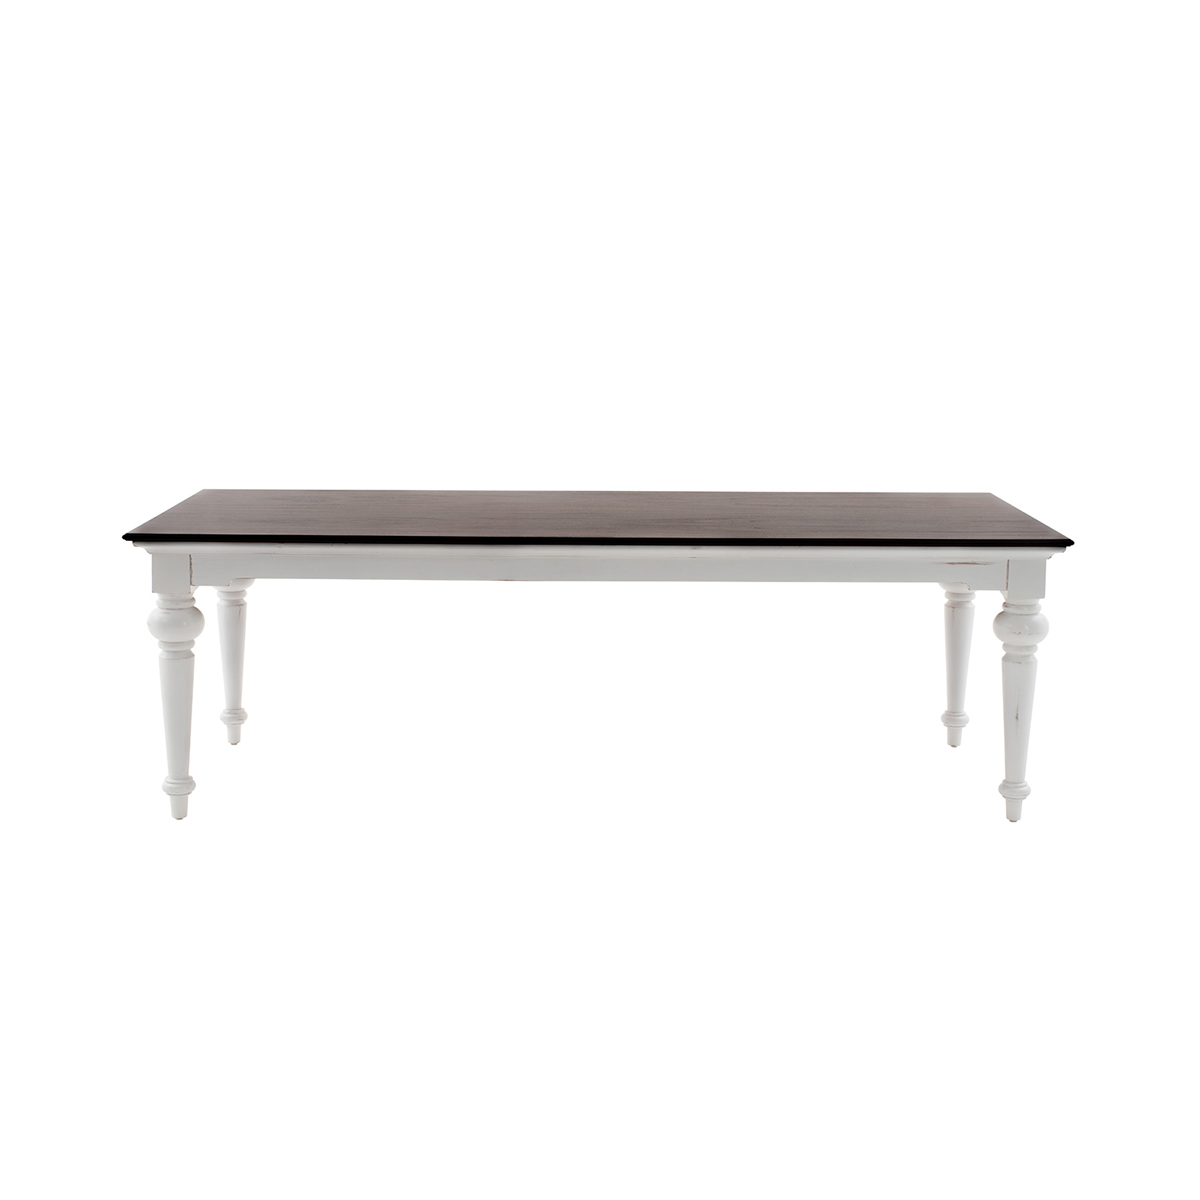 NovaSolo Provence Accent Dining Table 240 cm